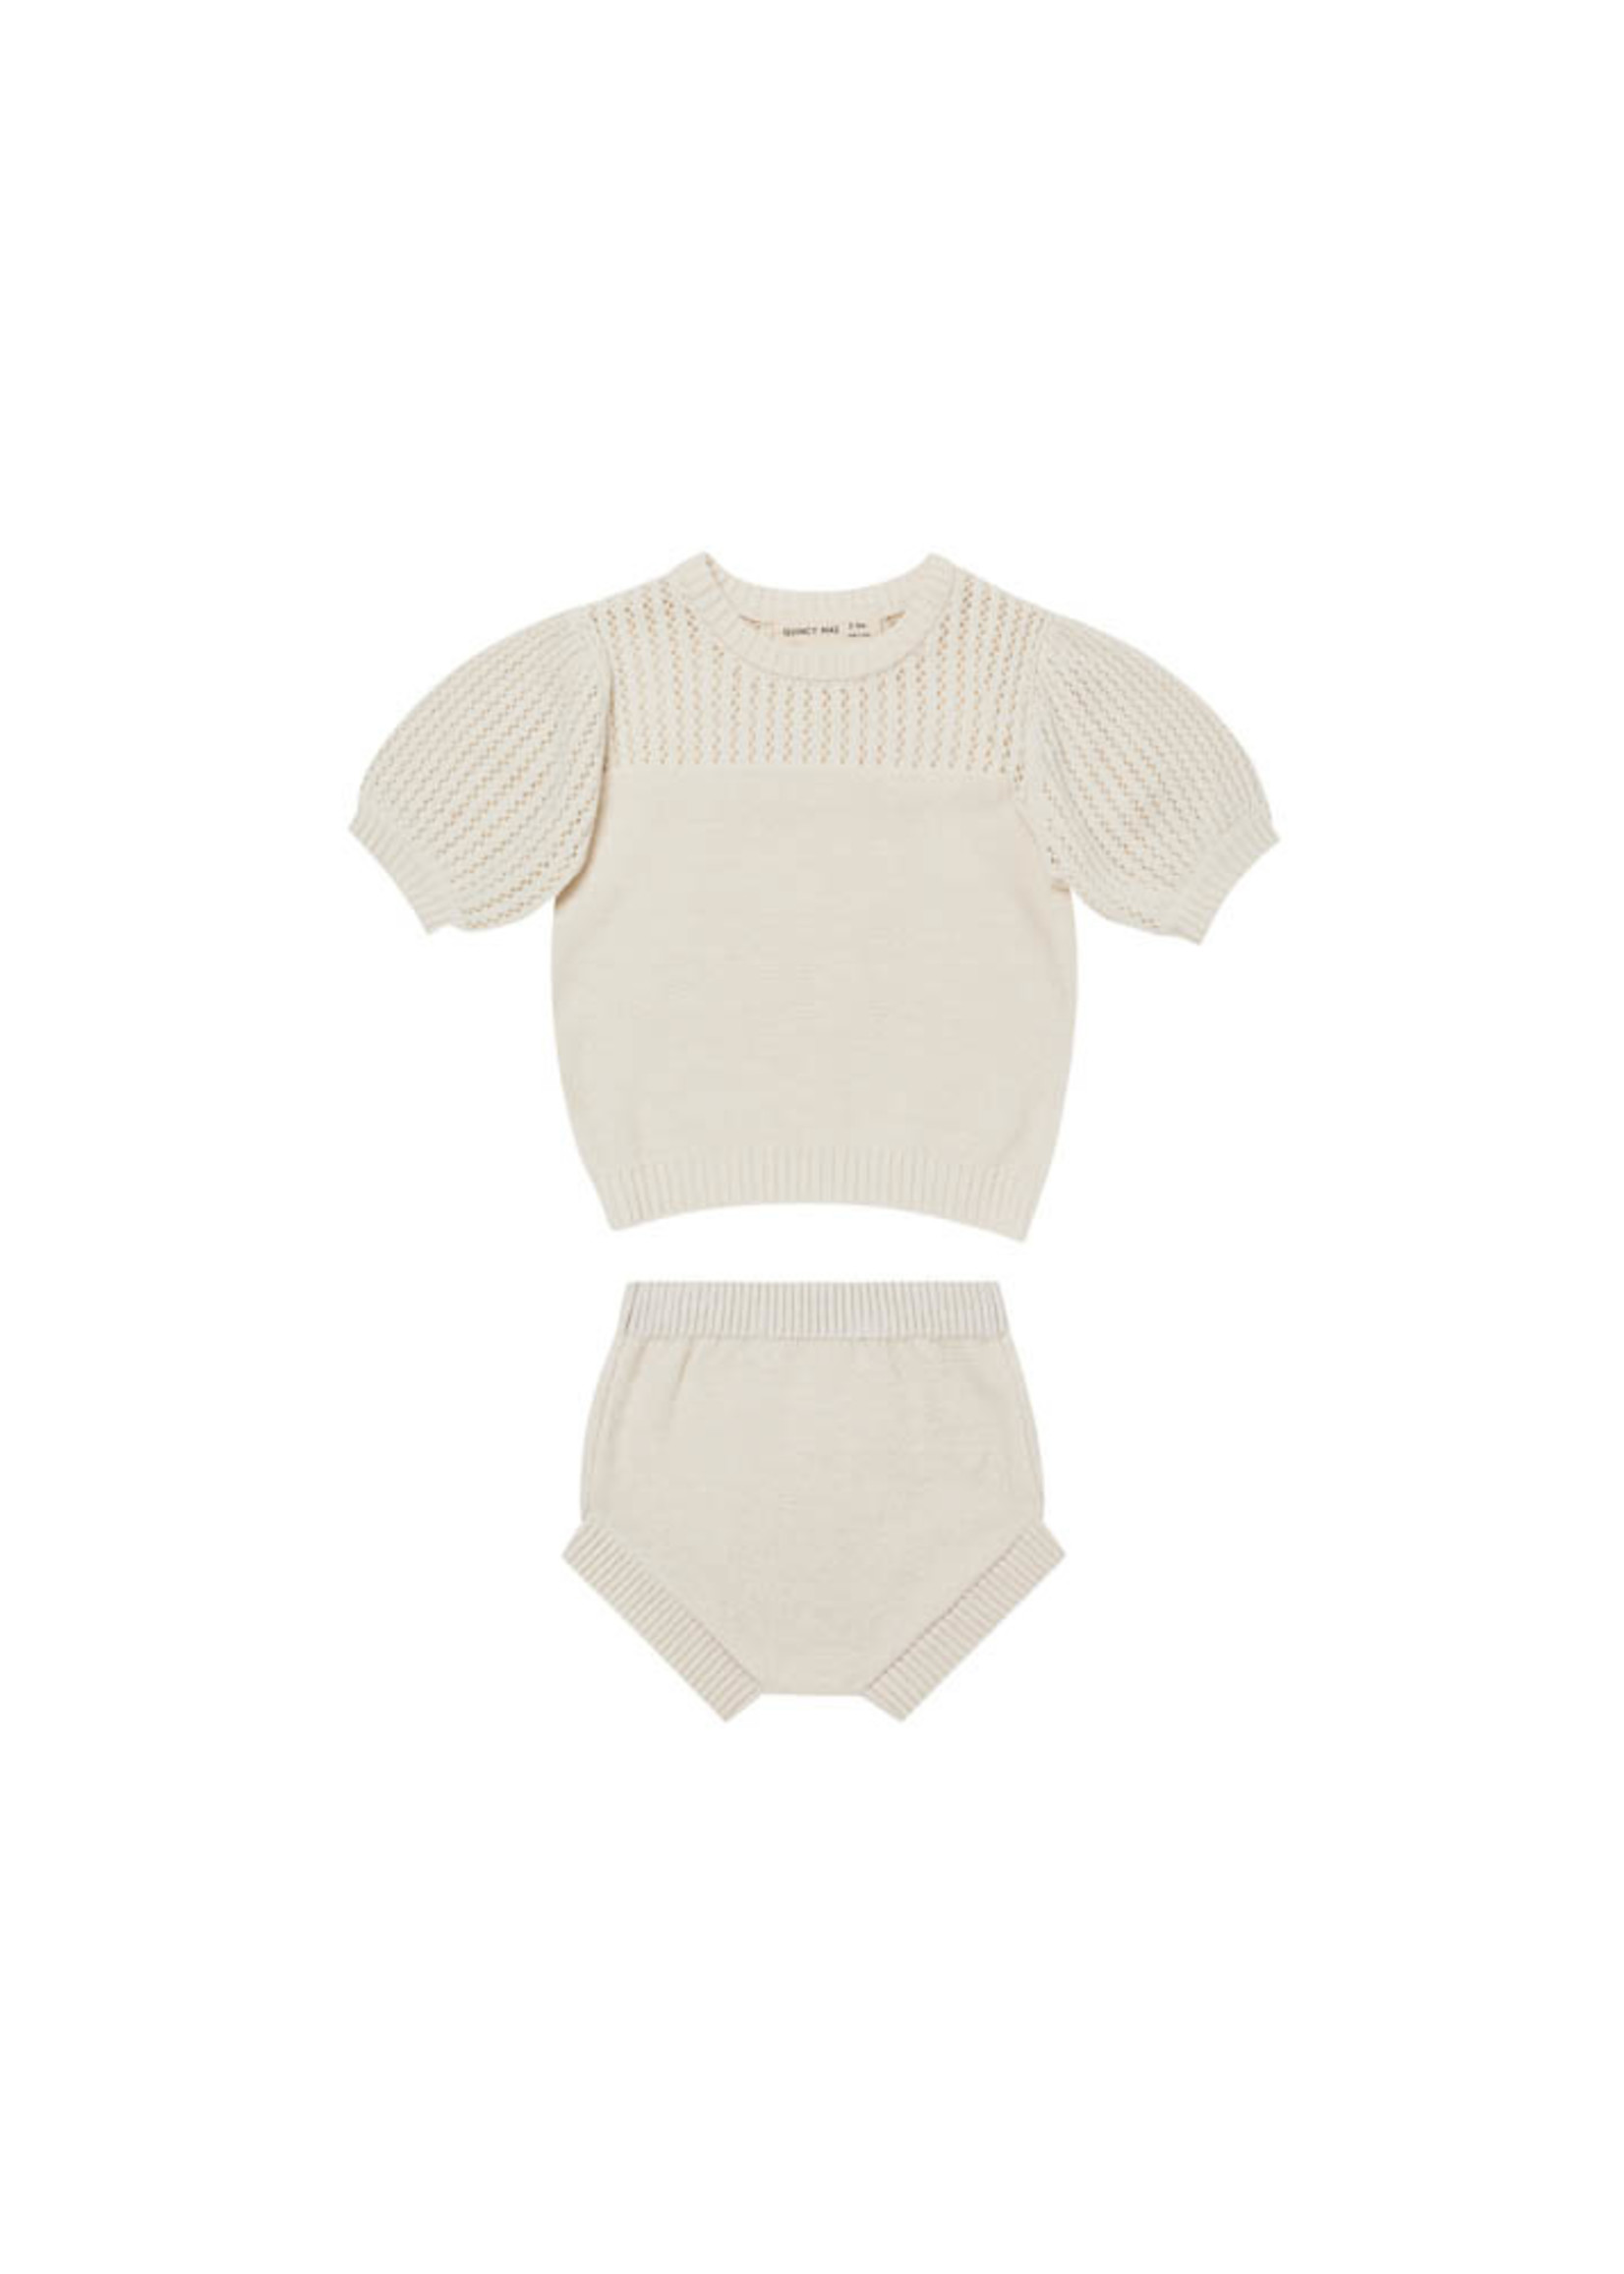 Quincy Mae Pointelle Knit Set - Ivory